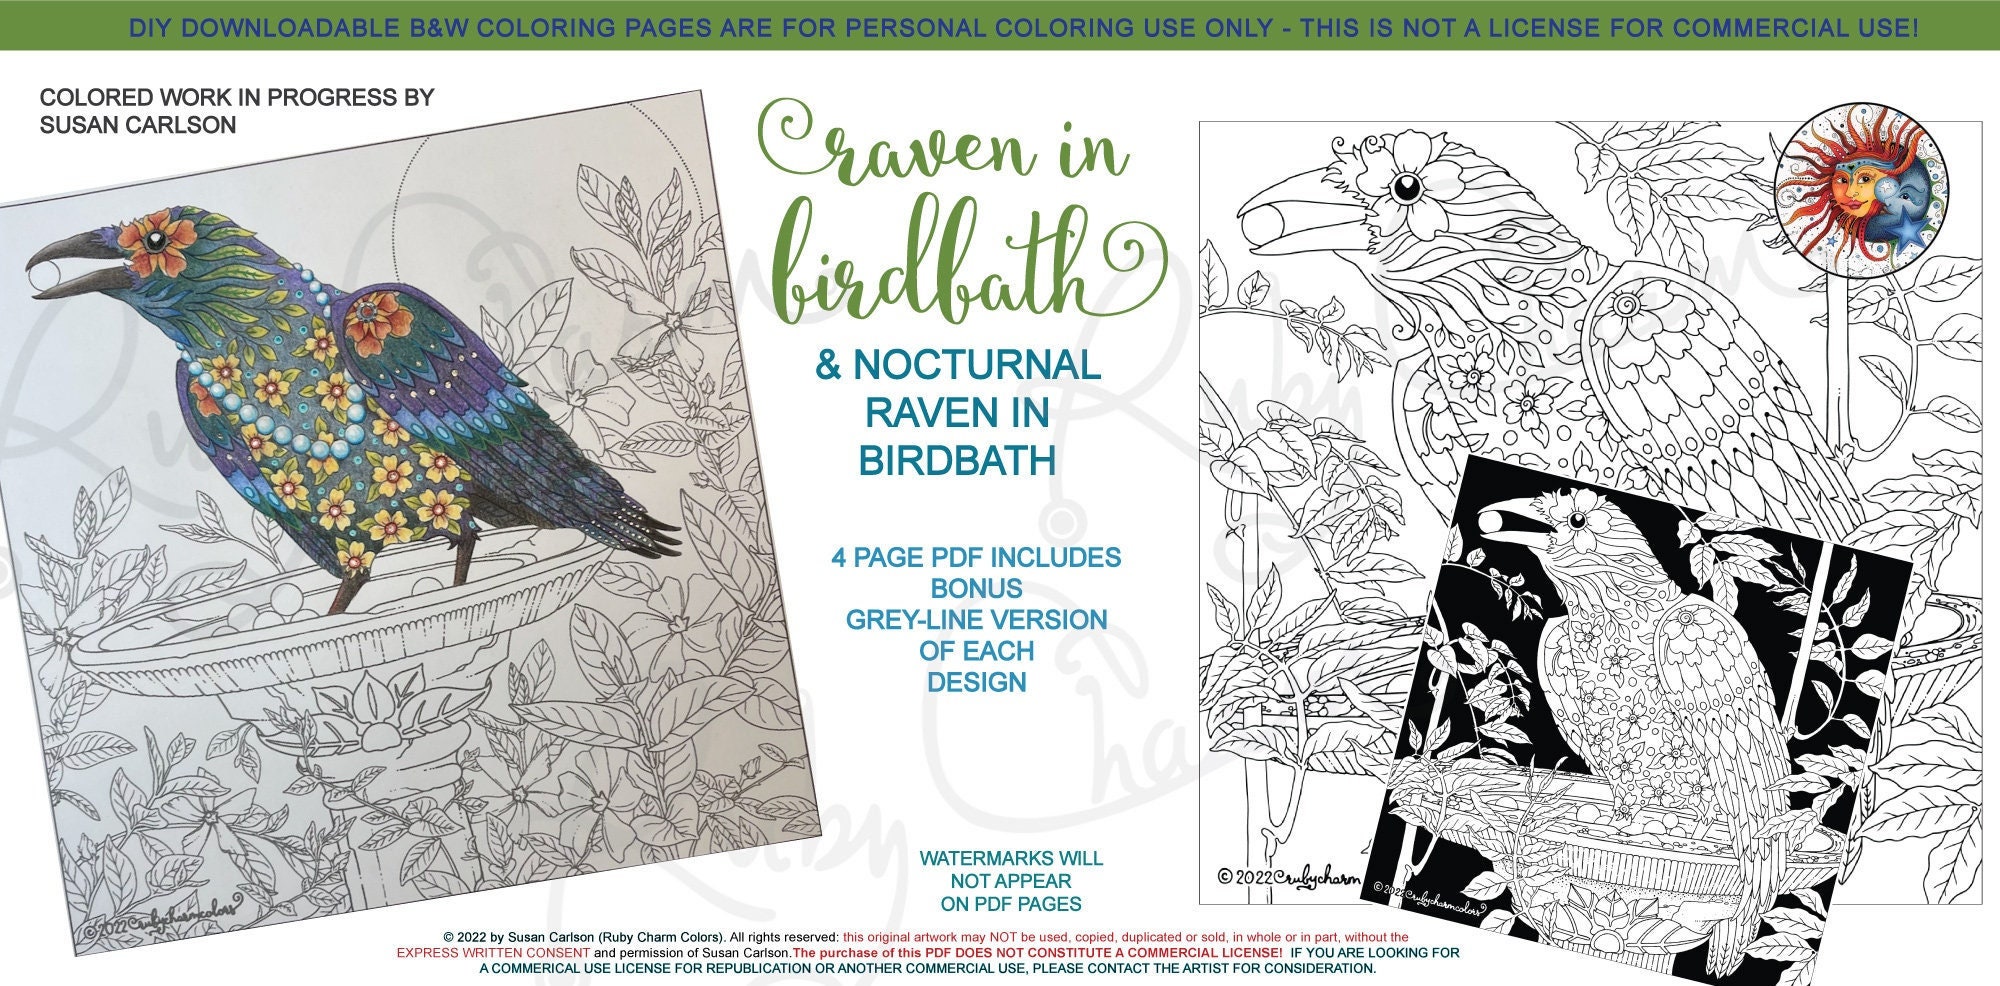 Birdy: A Fanciful Bird Coloring book, spiral-bound, limited Artist Edition  - Now in Stock!